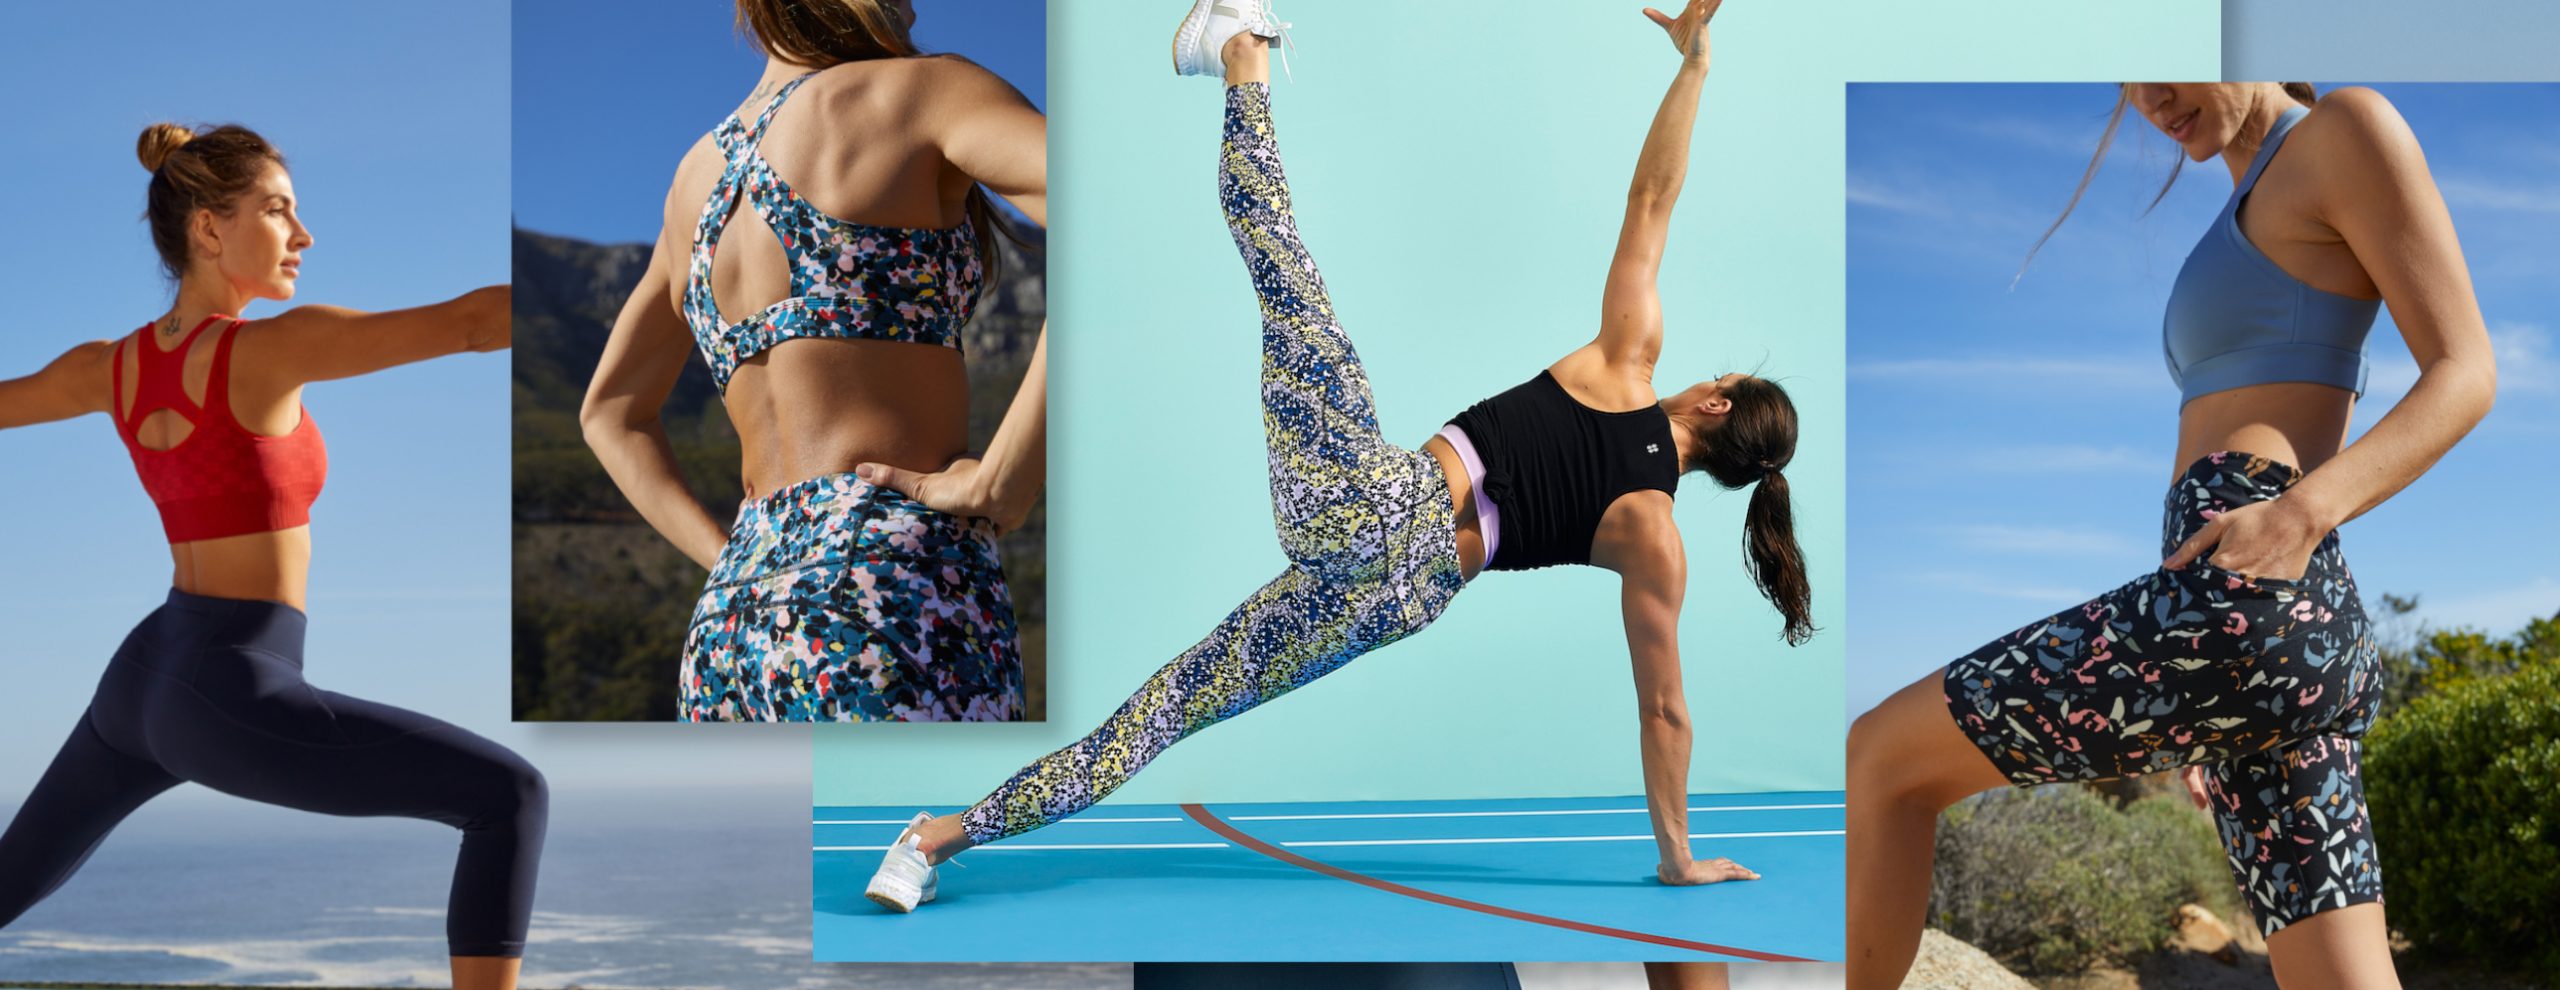 Sweaty Betty release their first ever pair of recycled leggings